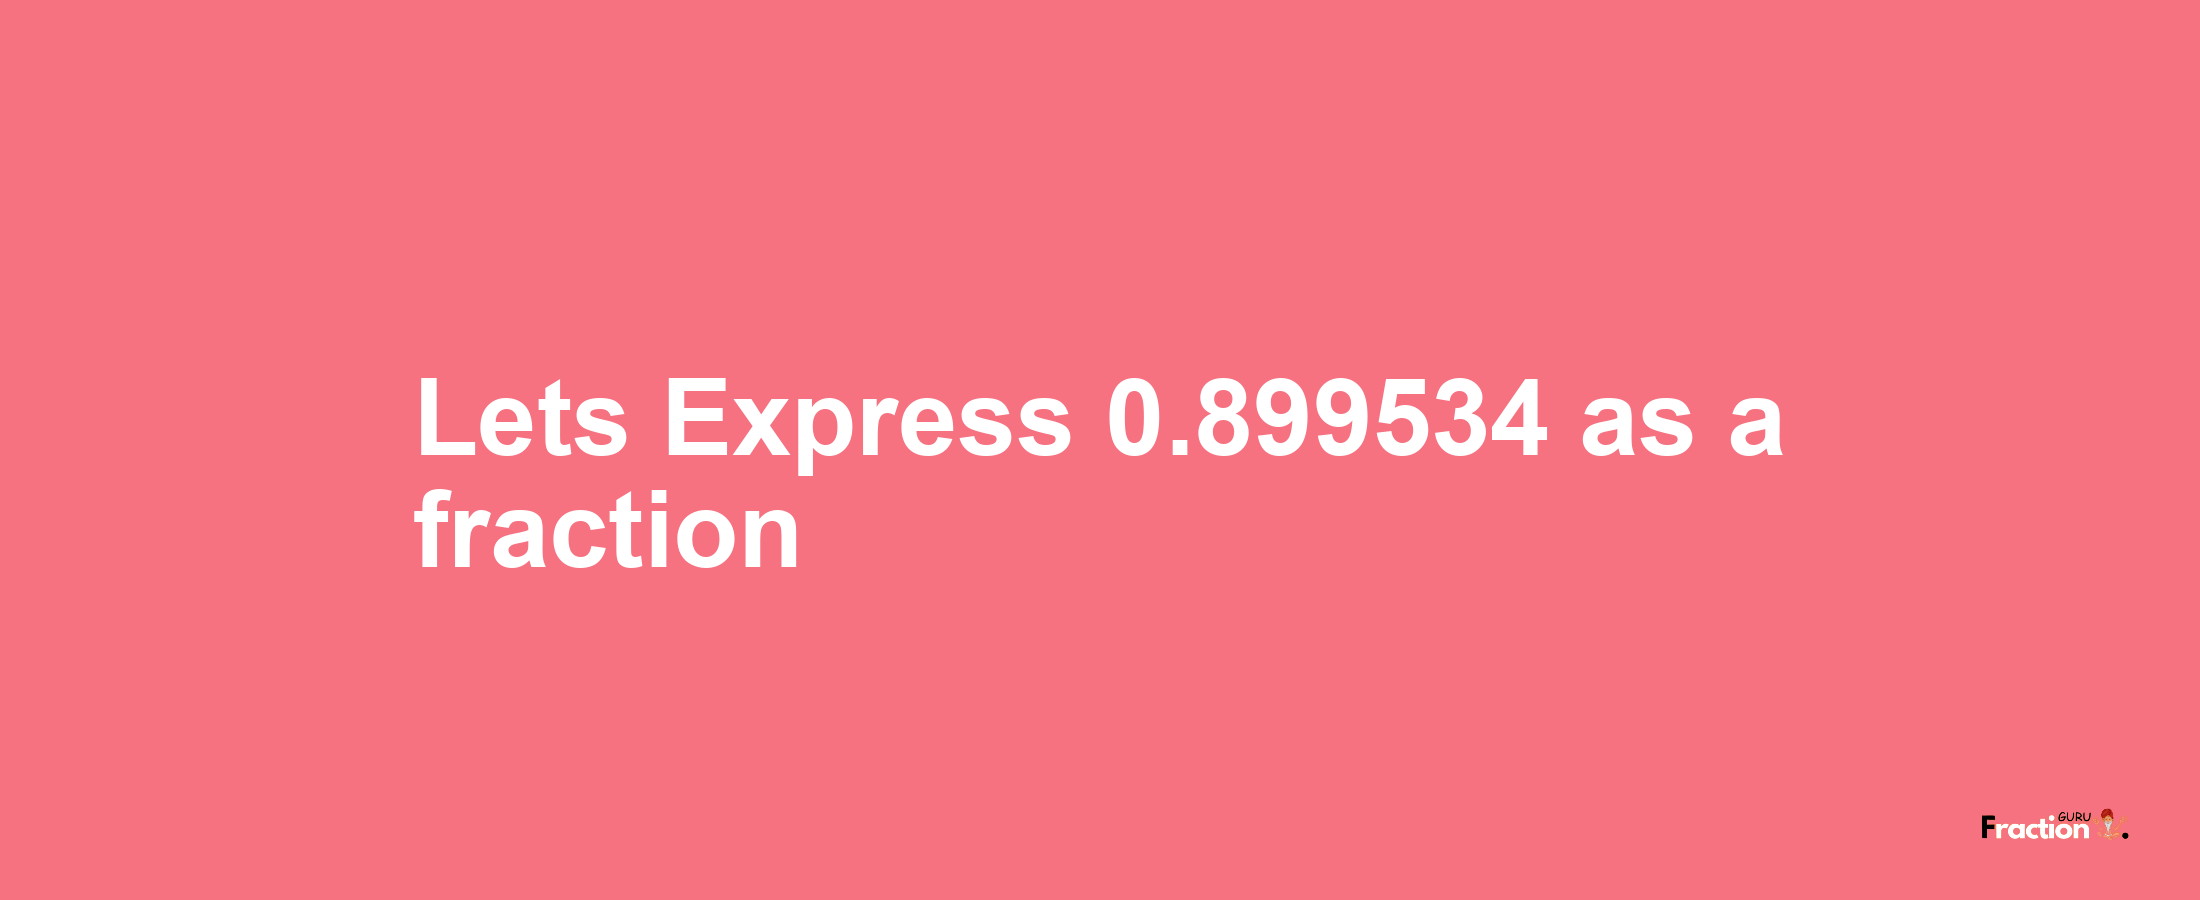 Lets Express 0.899534 as afraction